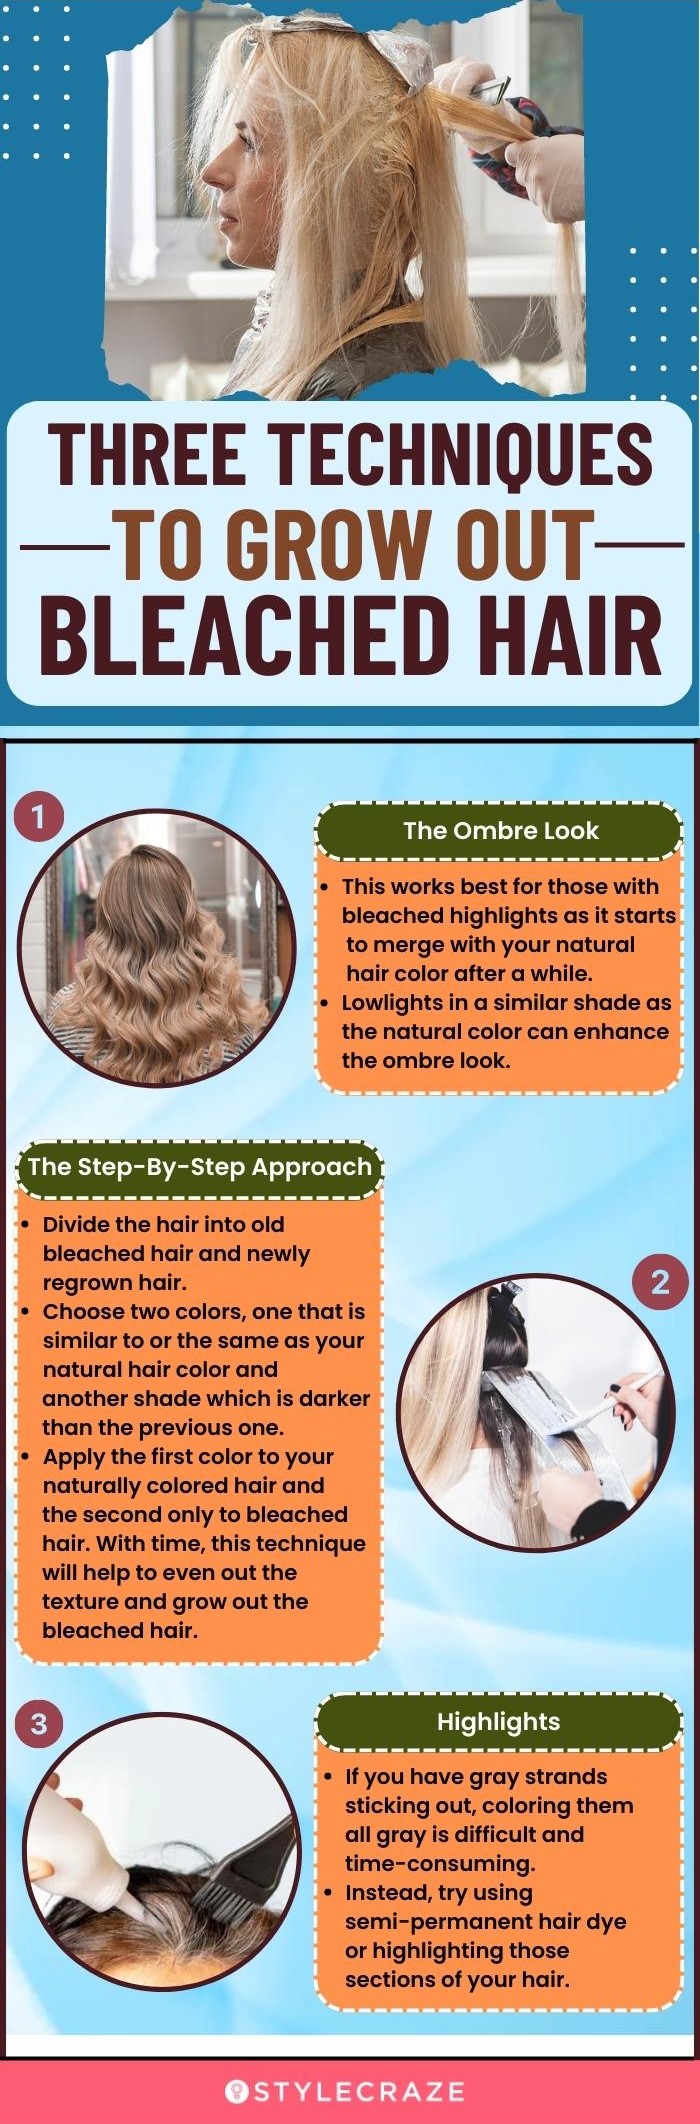 three techniques to grow out bleached hair (infographic)